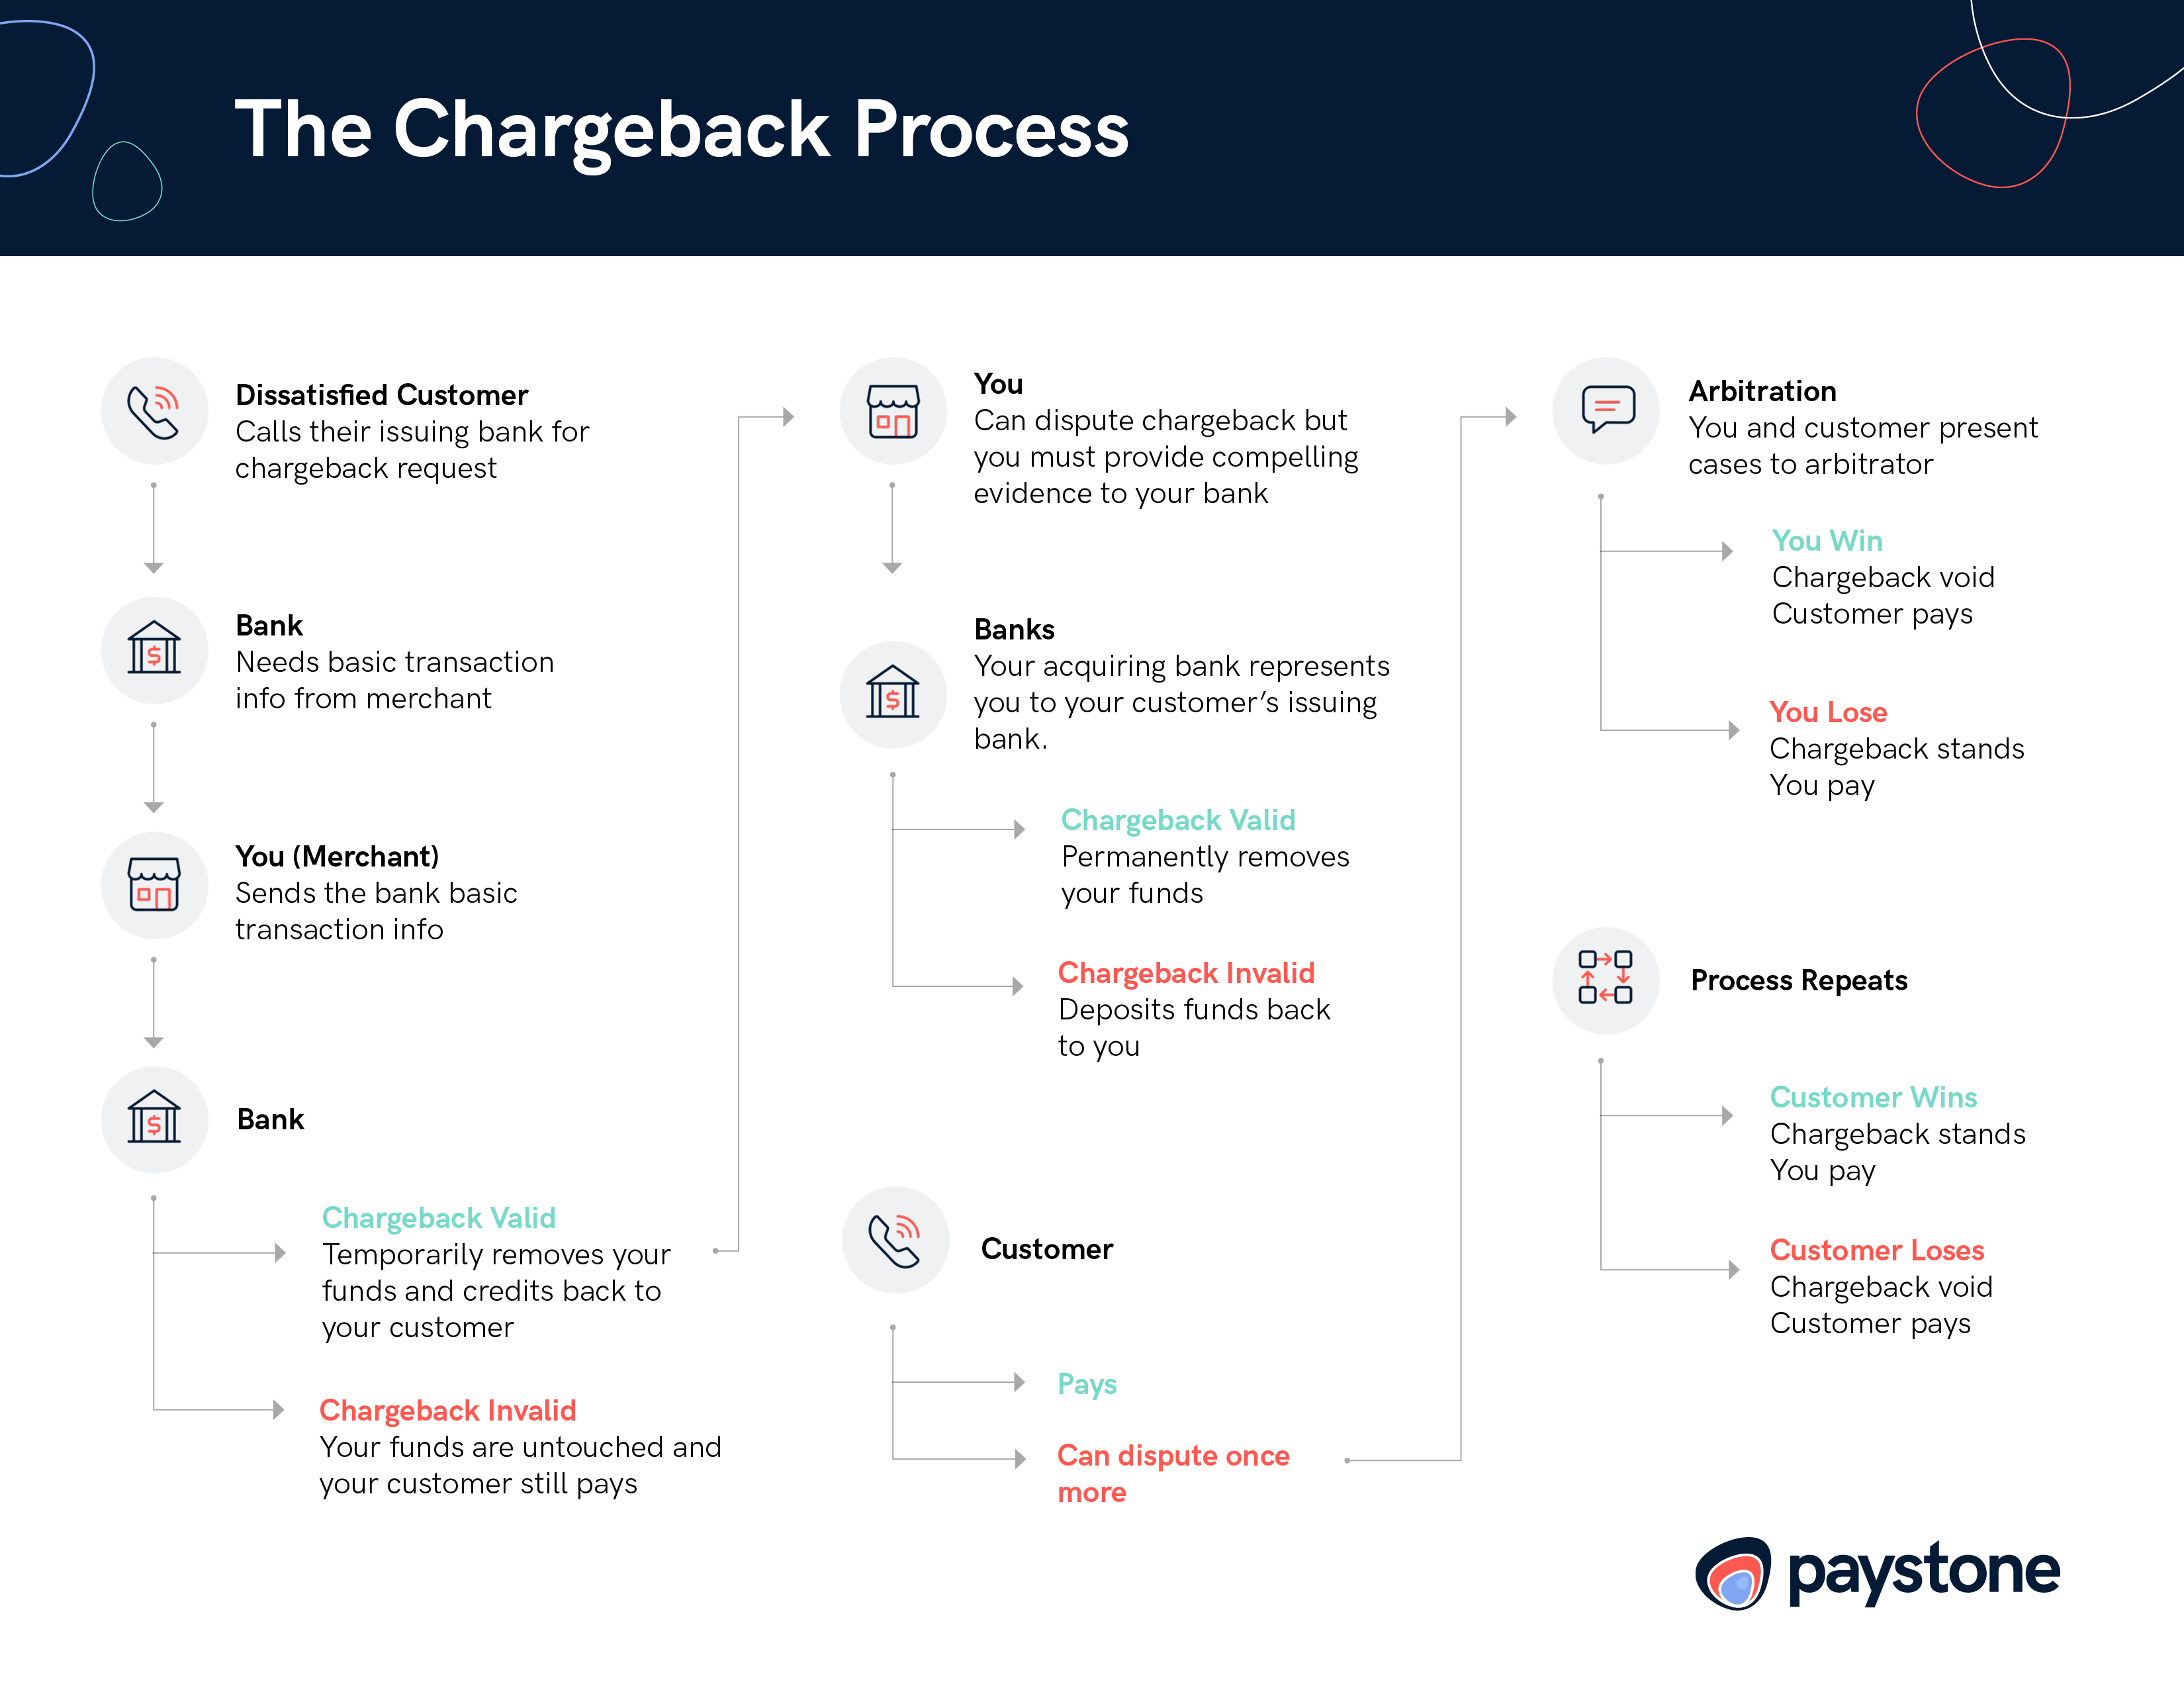 TheChargeBackProcess